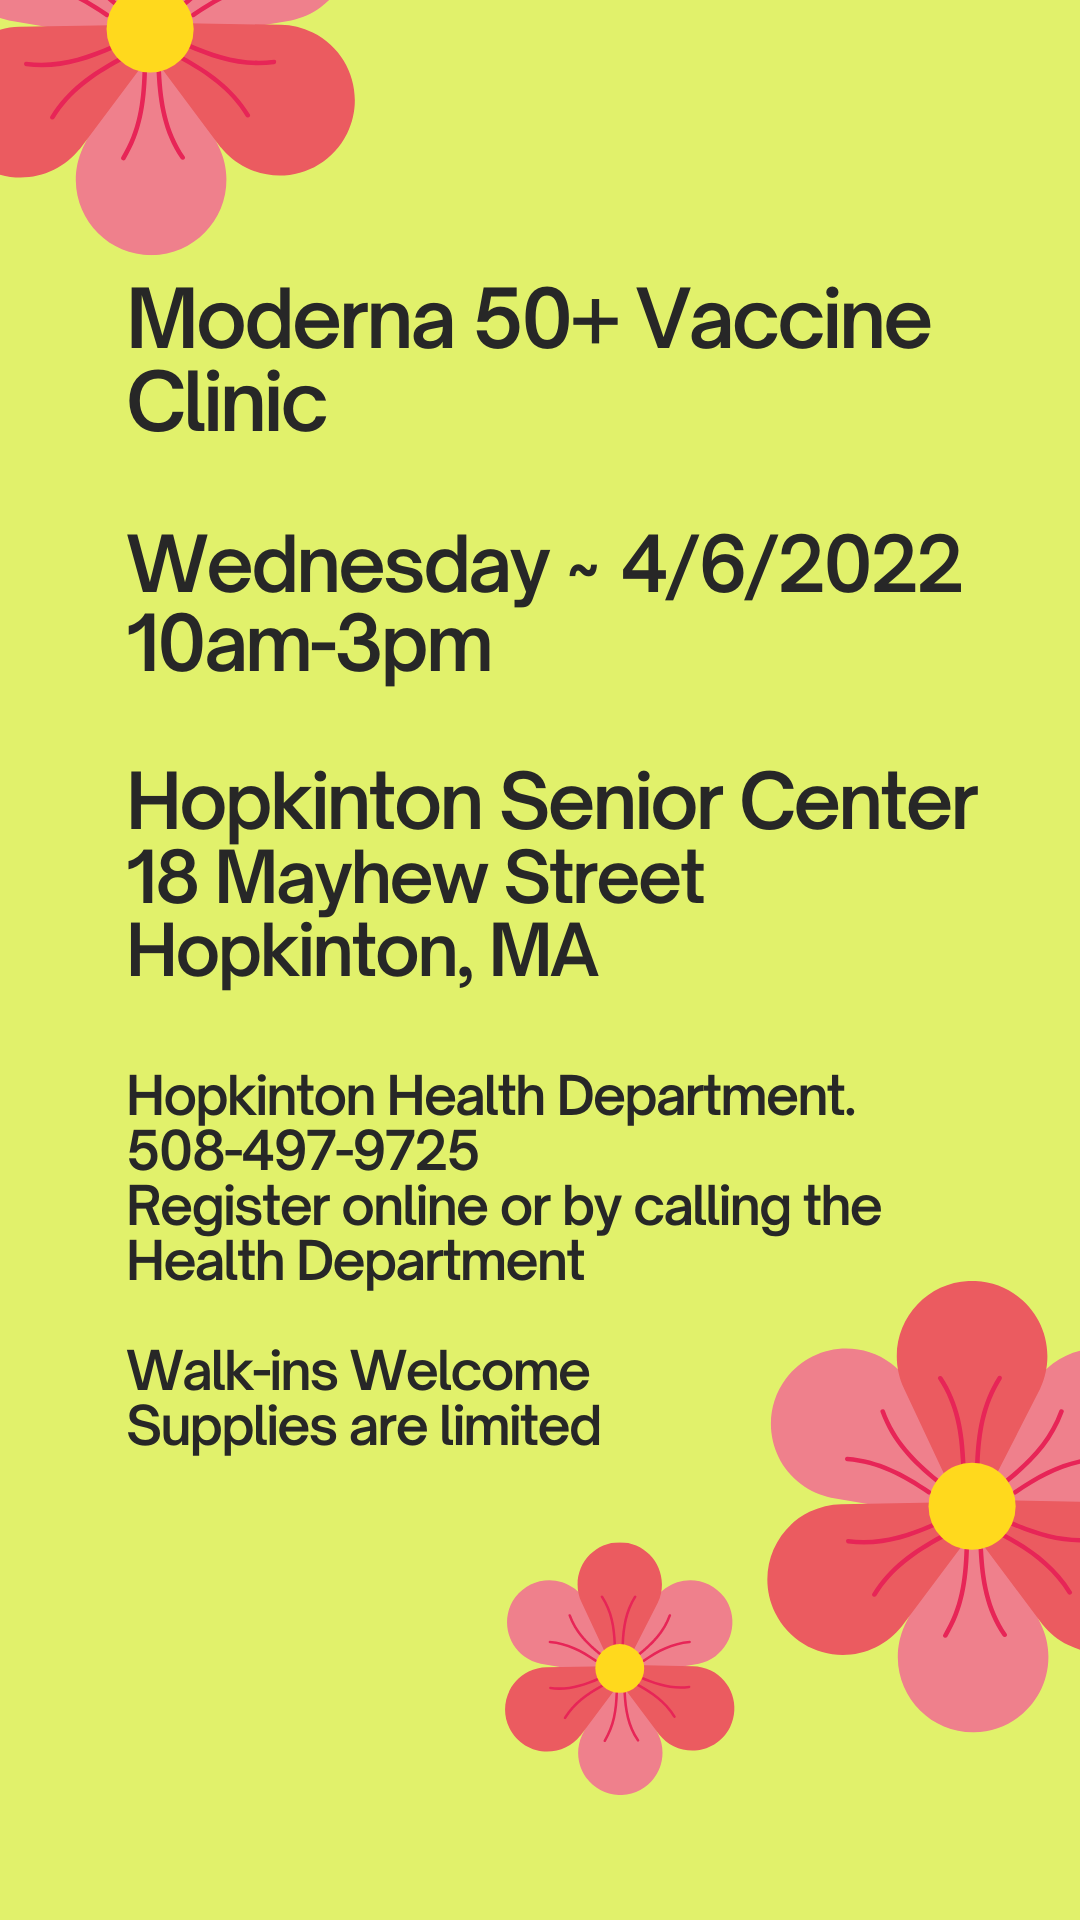 Your Story - Vaccine Clinic 3722 1-3pm Town Hall Hopkinton Health Department Moderna ages 18+.png